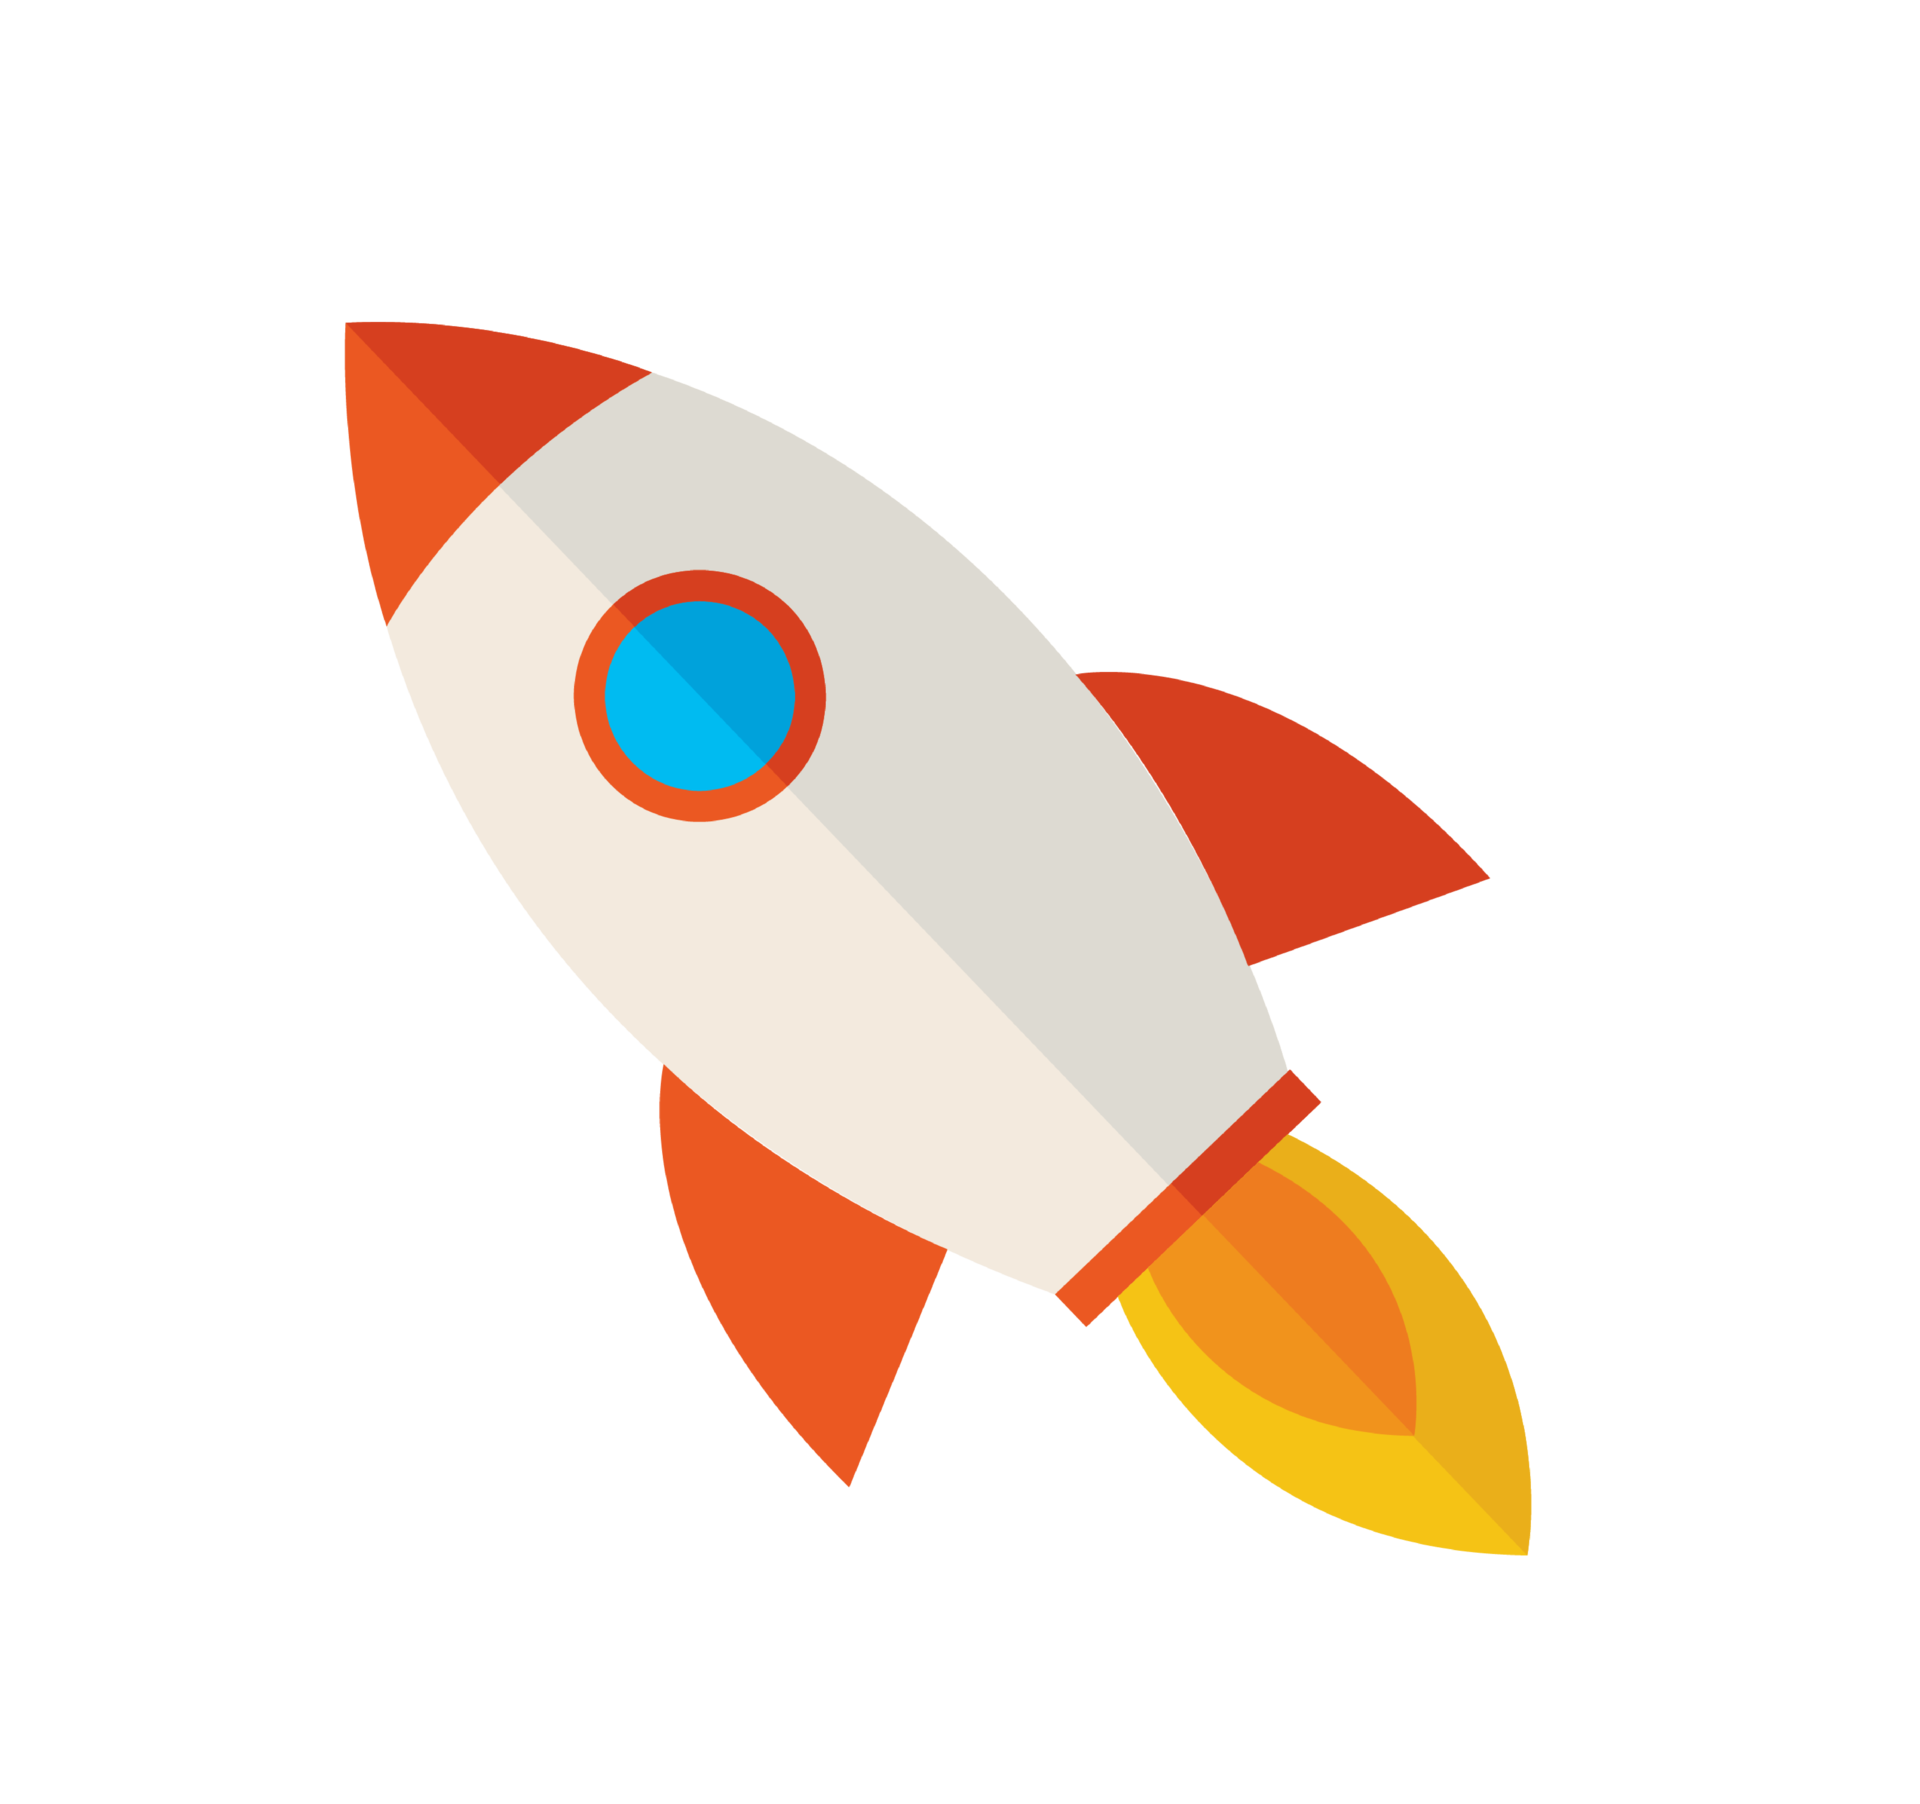 Free rocket launch. start-up symbol 12375445 PNG with Transparent Background